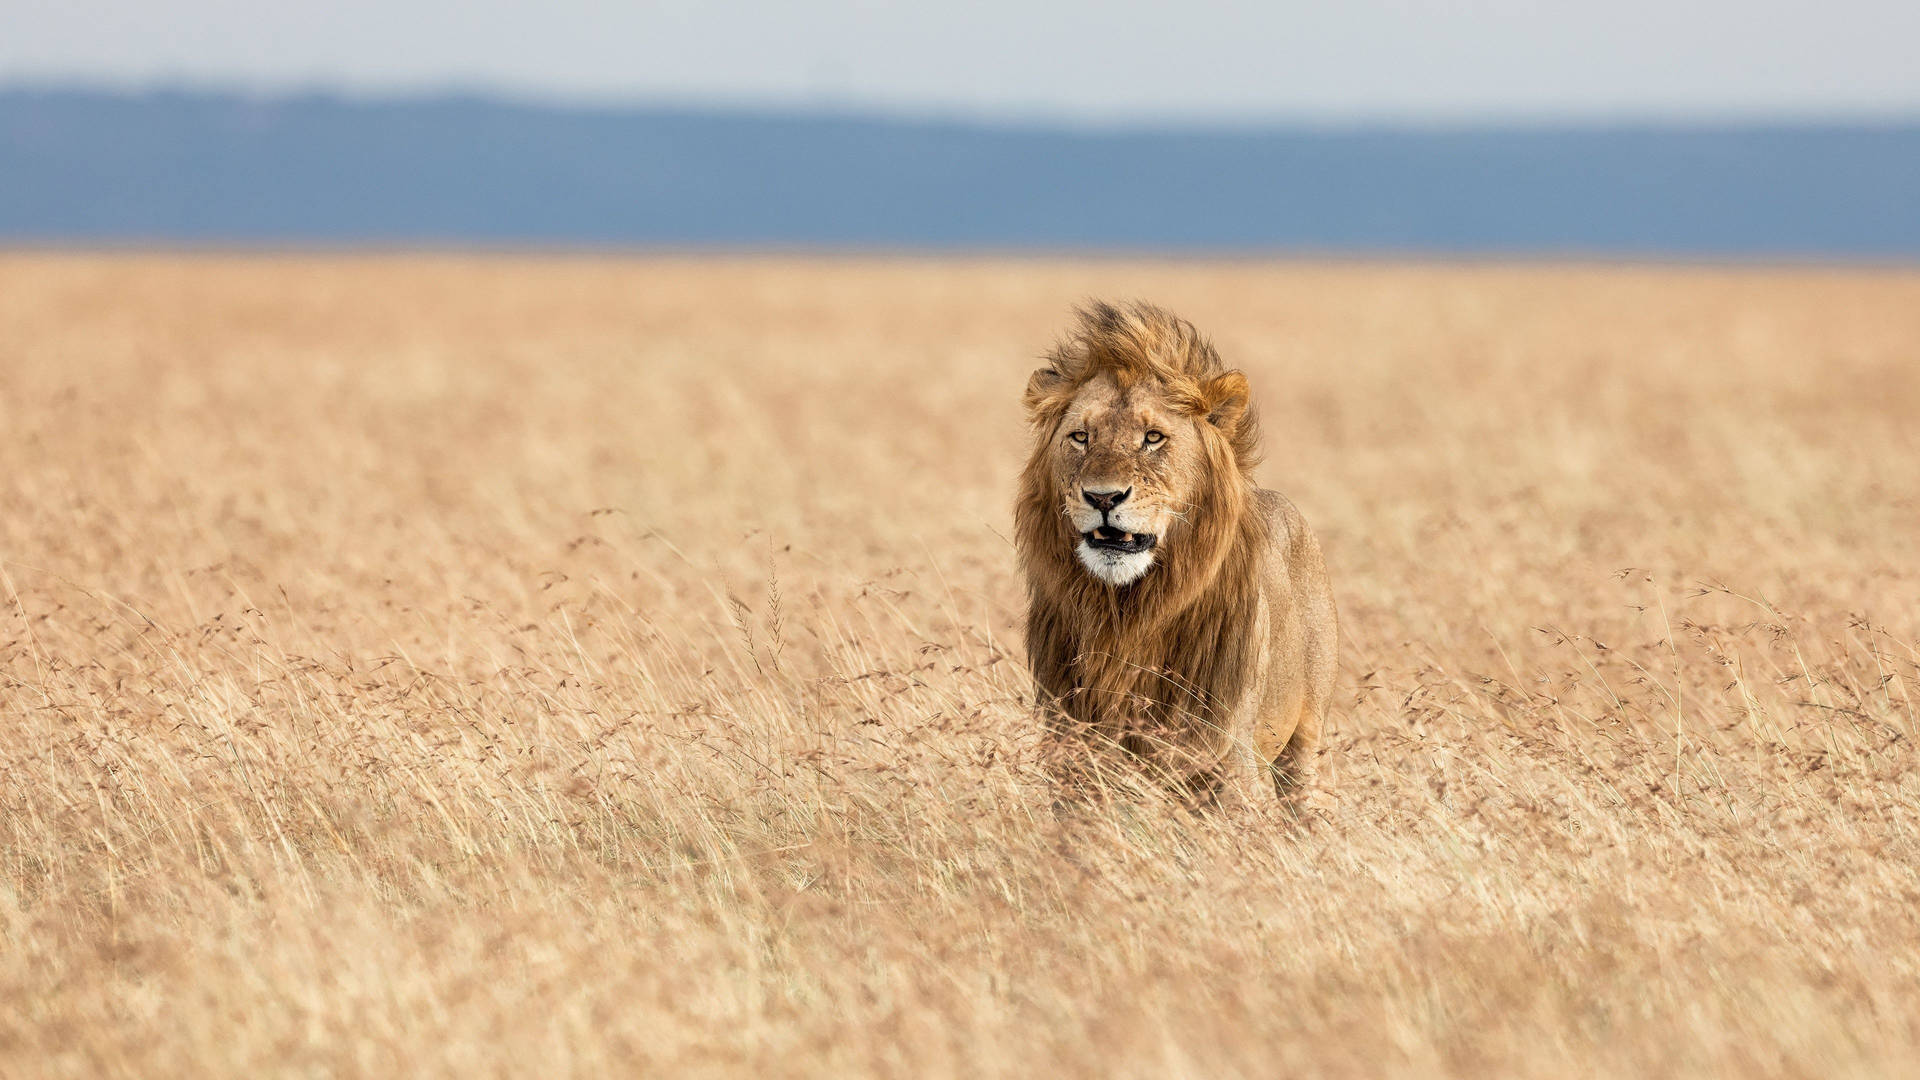 Lion In Africa Focus Shot Picture